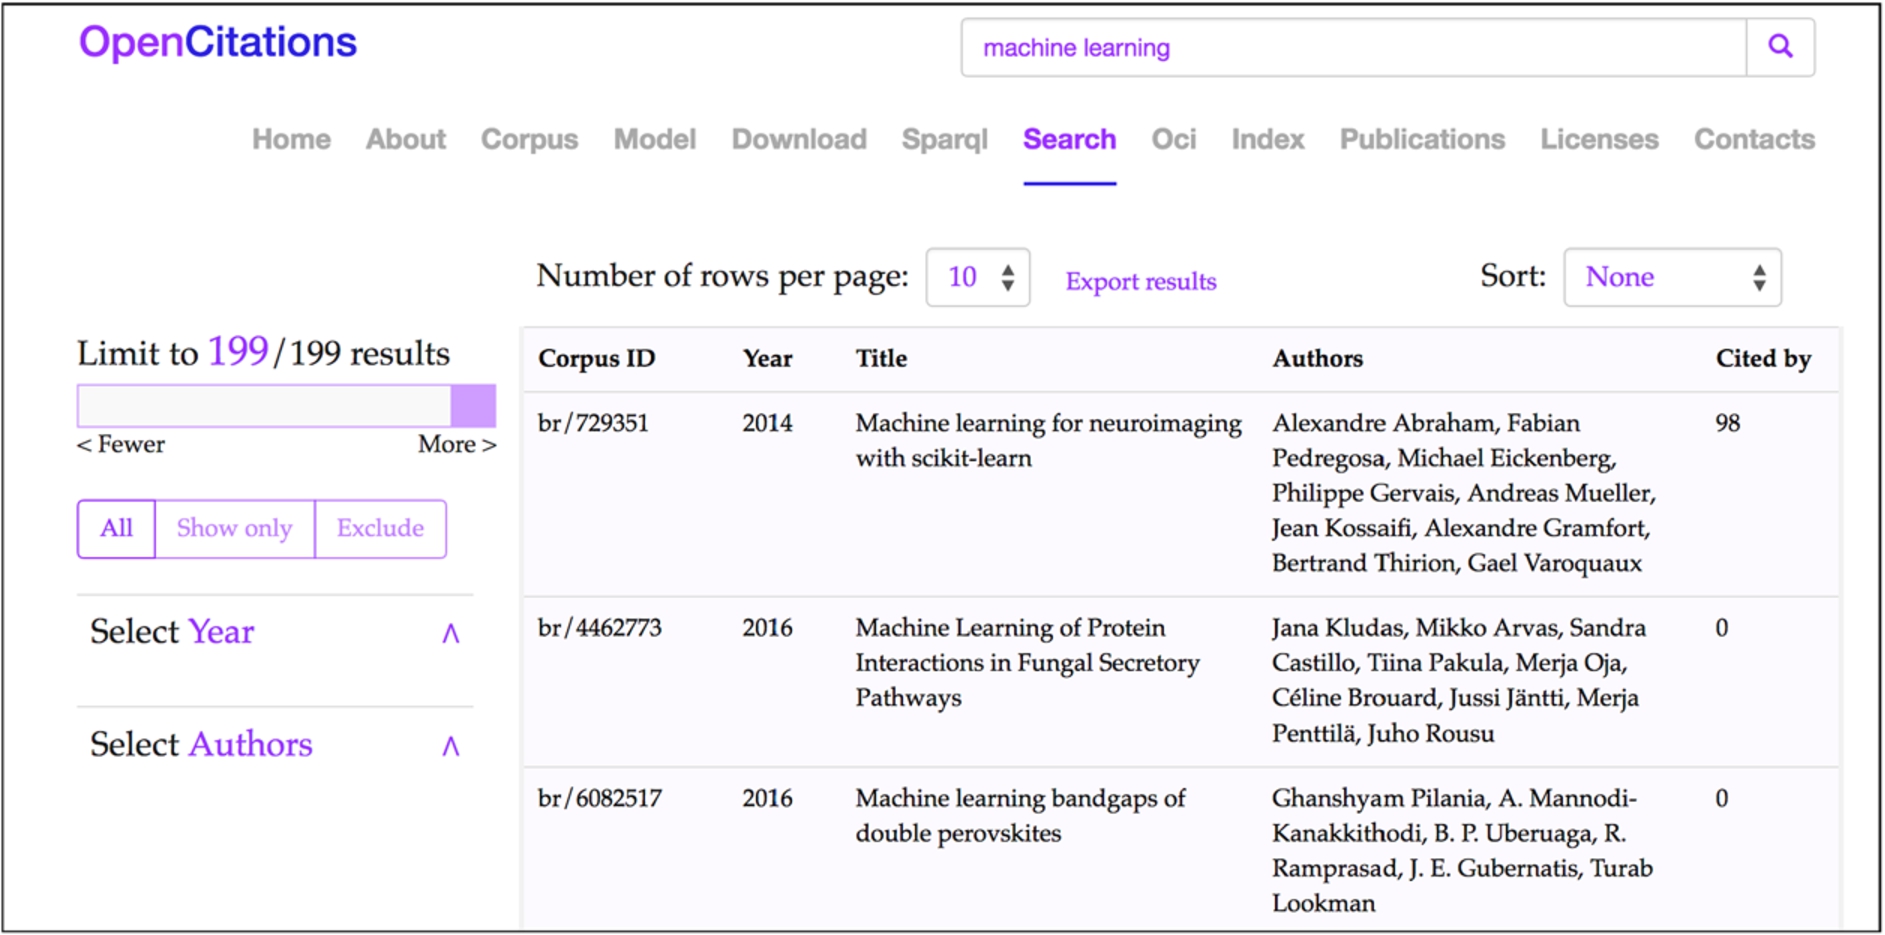 The Results interface of OSCAR for the OCC: the results shown are those obtained after the application of a free-text search using the string ‘machine learning’ (http://opencitations.net/search?text=machine+learning). Each row represents a bibliographic resource, while the fields represent (from left to right): the resource identifier in the OpenCitations Corpus (Corpus ID), the year of publication (Year), the title (Title), the list of authors (Authors), and how many times the bibliographic resource has been cited by other resources according to the data available in the OCC (Cited by).